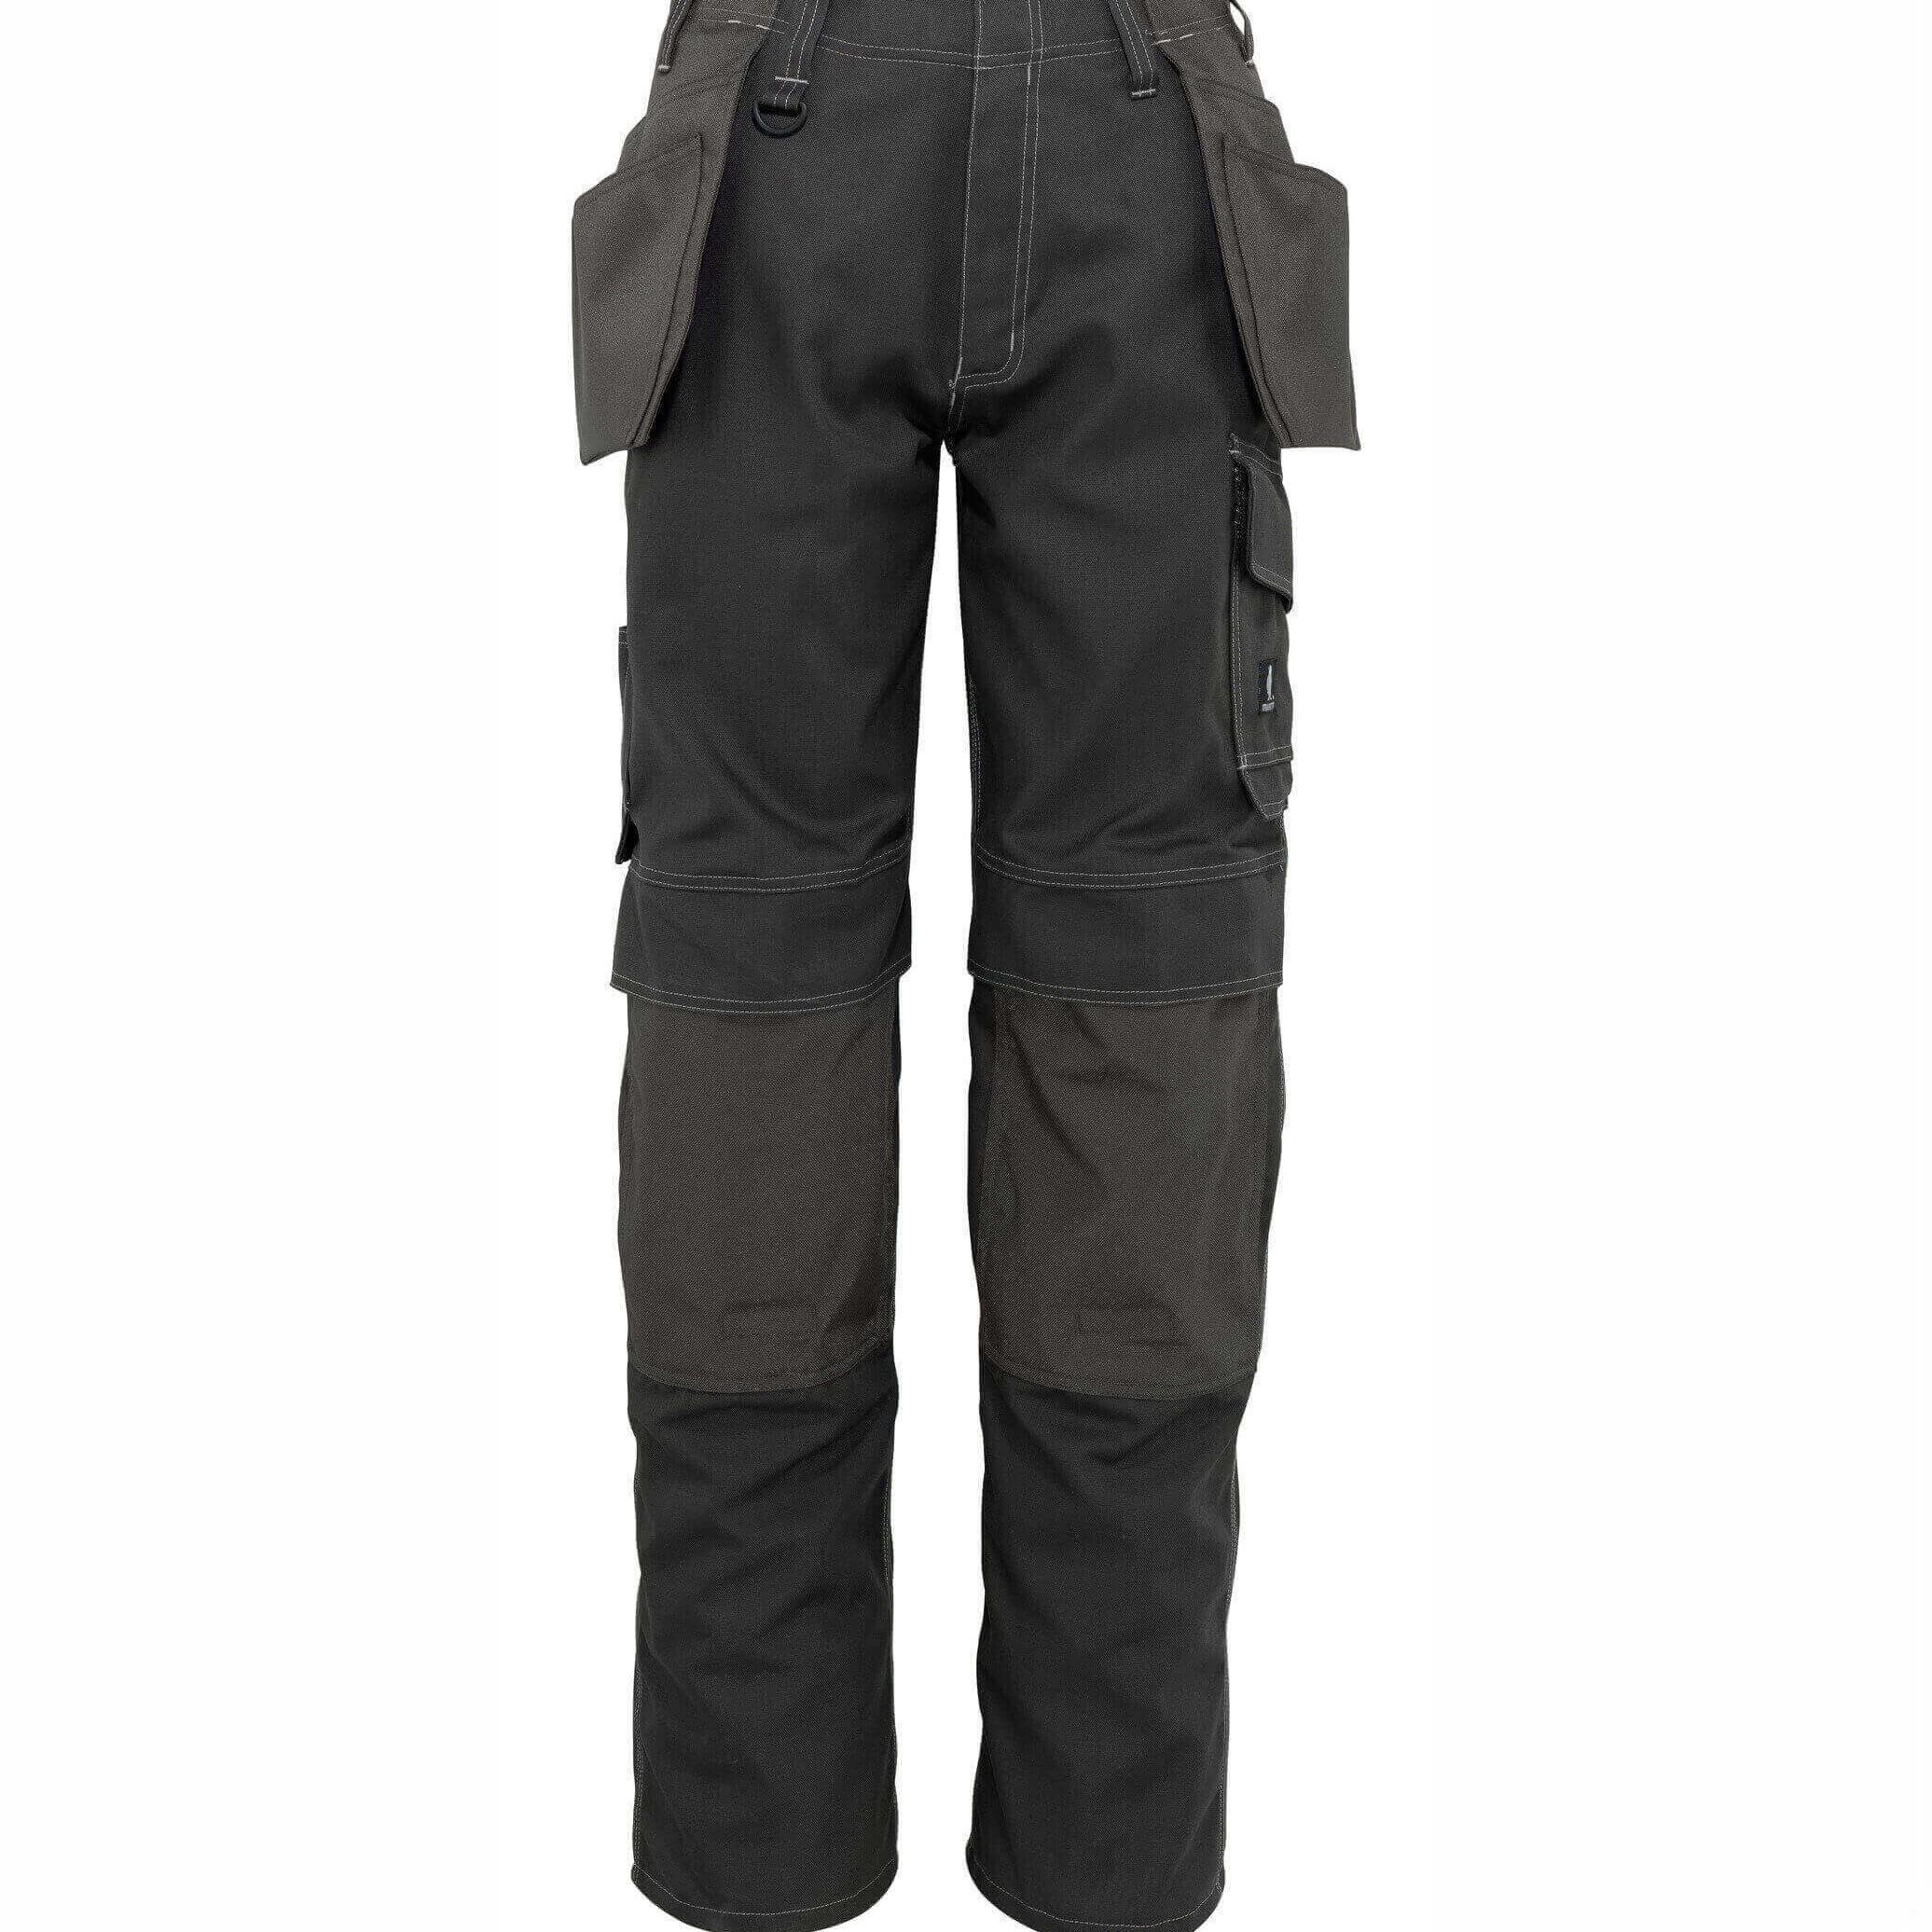 Mascot Industry Springfield Trousers; With Holster Pockets; 10131-154-18; Grey (GR); Regular Leg (32